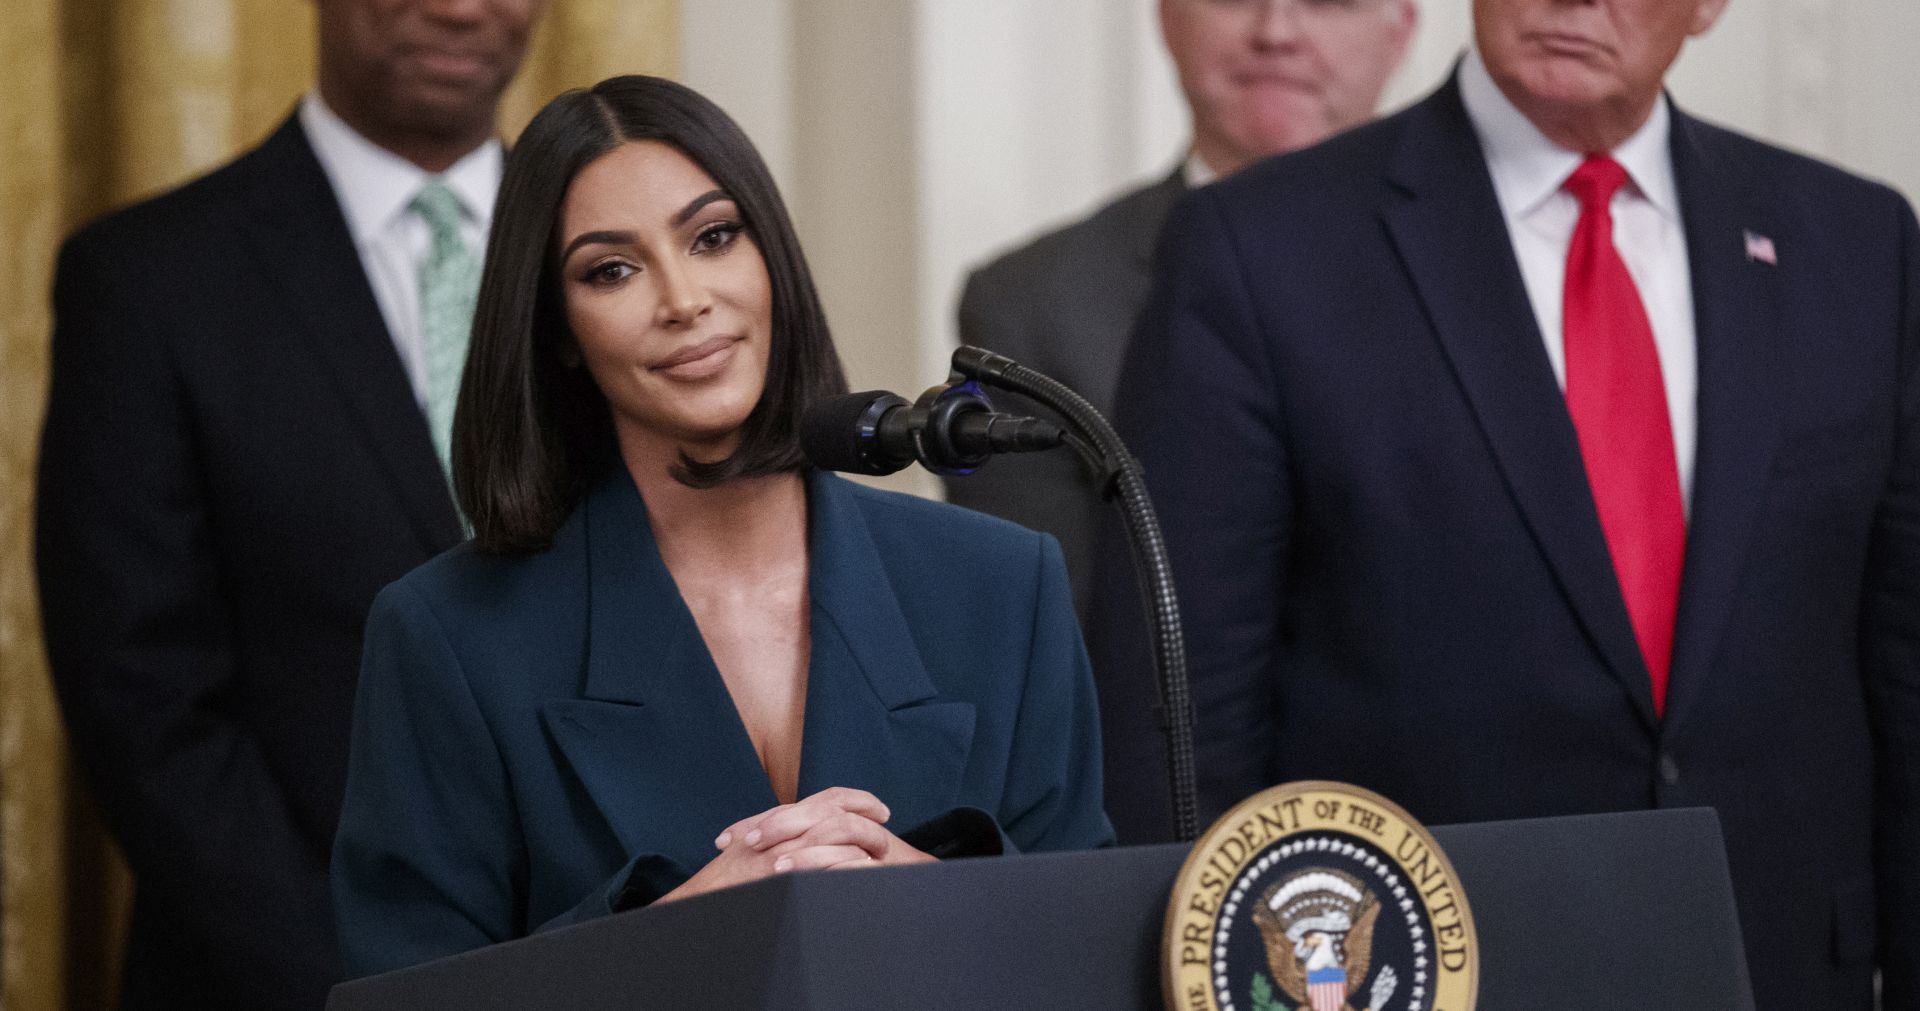 epa07646641 Reality star turned activist Kim Kardashian West (L) joined US President Donald J. Trump (R) on stage to deliver remarks during an event on second chance hiring programs for felons following incarceration in the East Room of the White House in Washington, DC, USA, 13 June 2019. The administration announced it is working with the private sector and non-profit organizations to help give former prisoners a second chance at the American dream.  EPA/SHAWN THEW